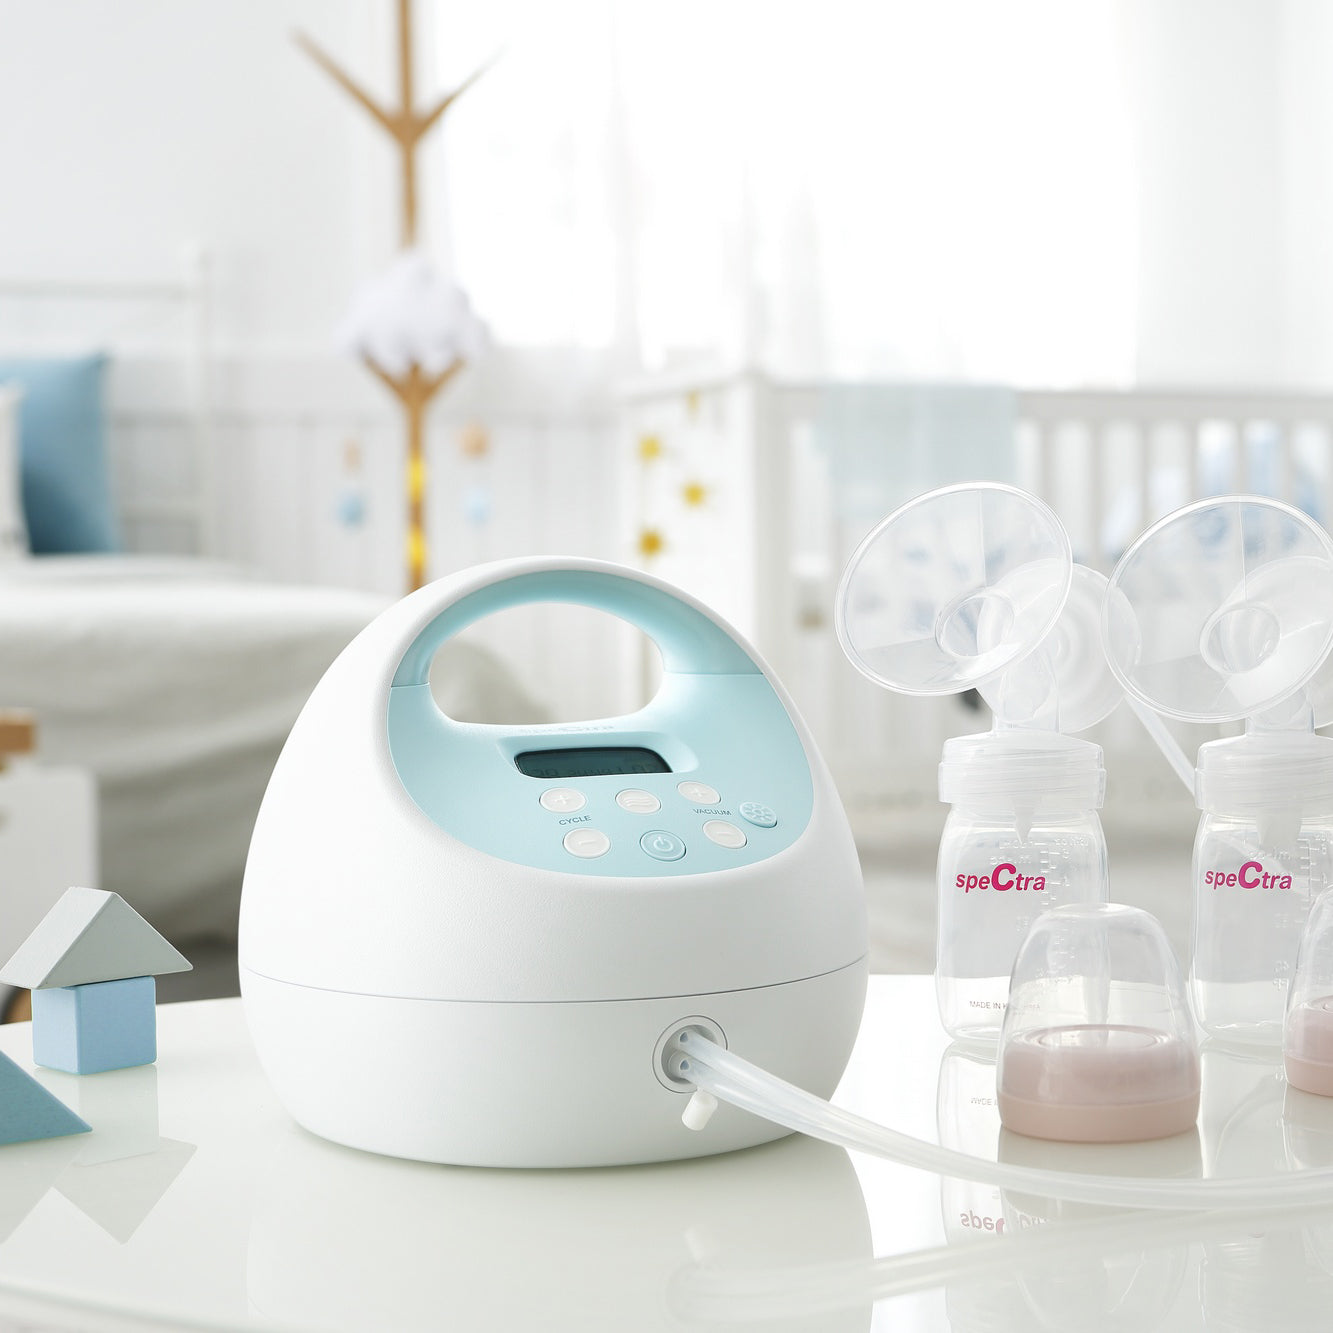 Spectra Baby UK, Electric Breast Pumps